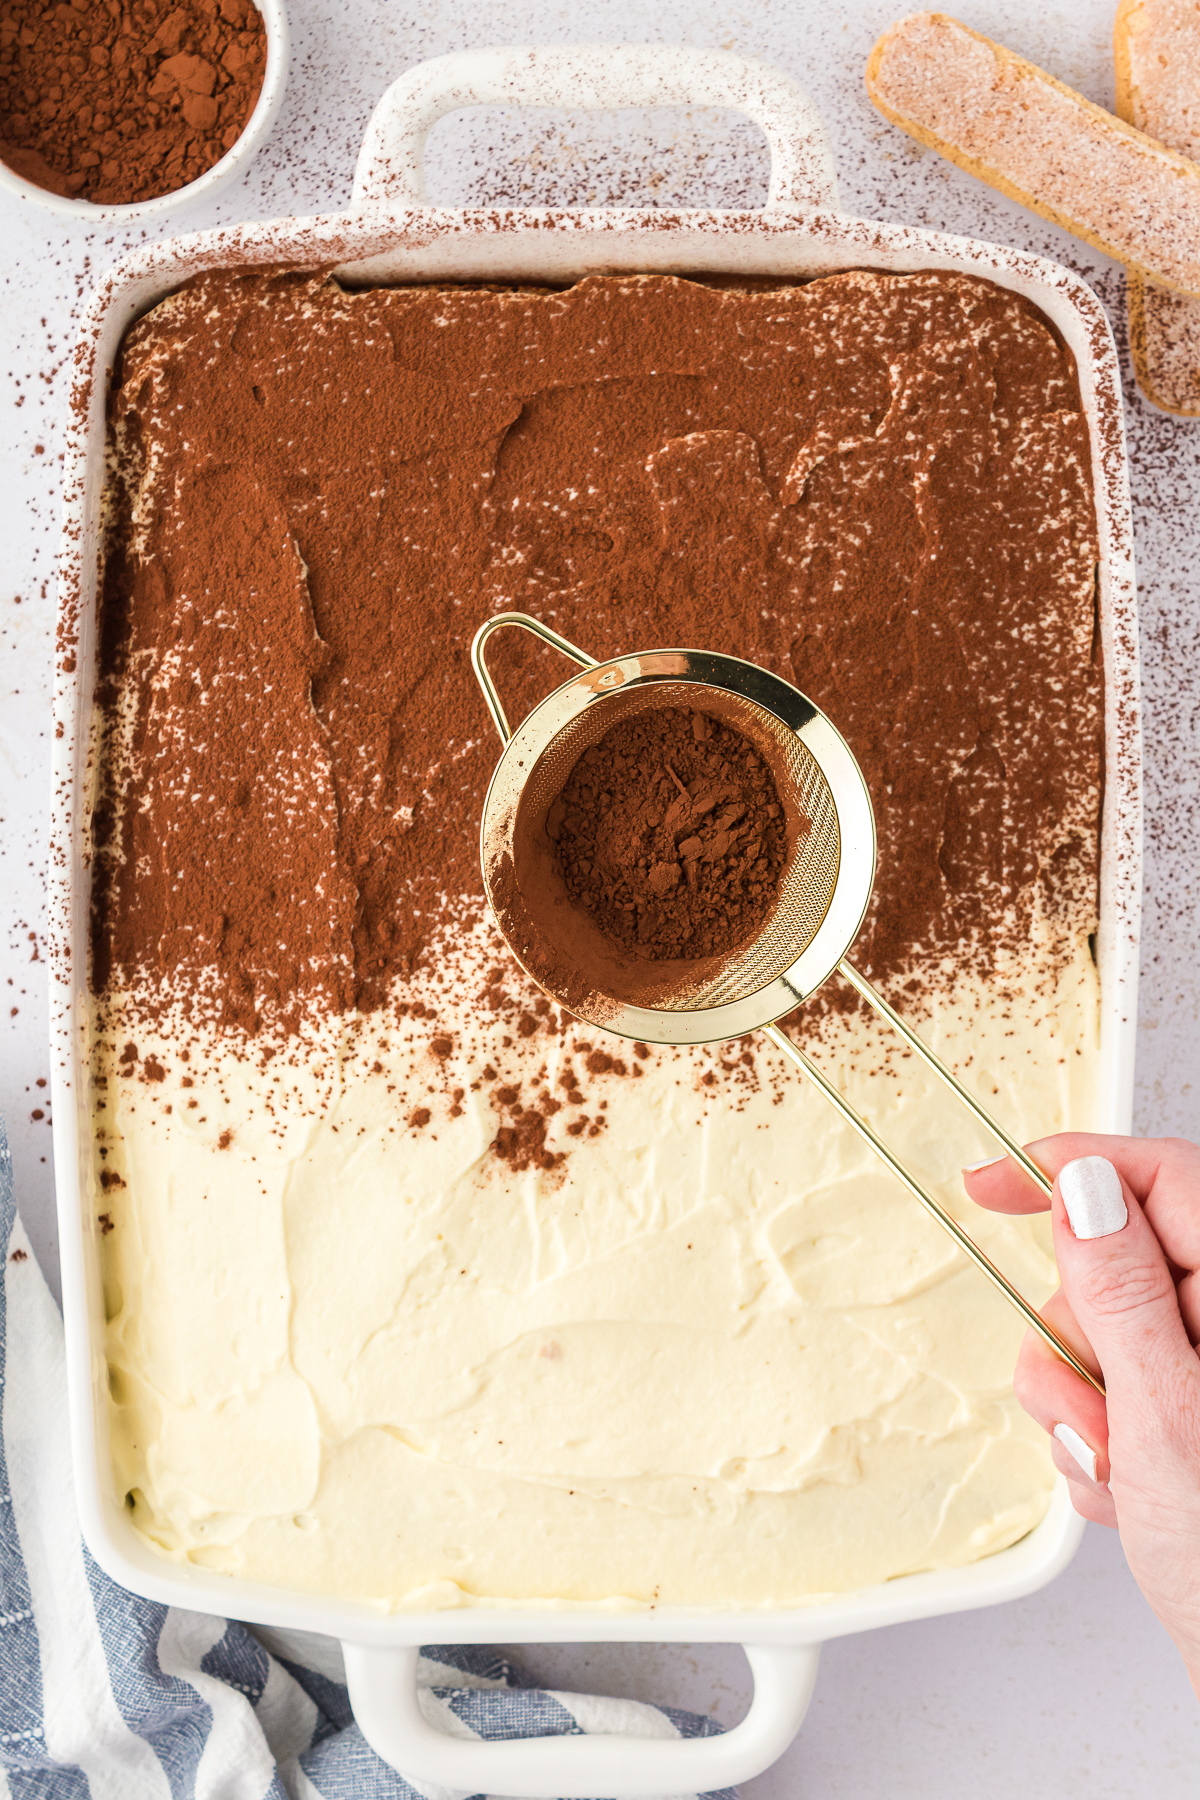 cocoa powder being dusted on top of tiramisu